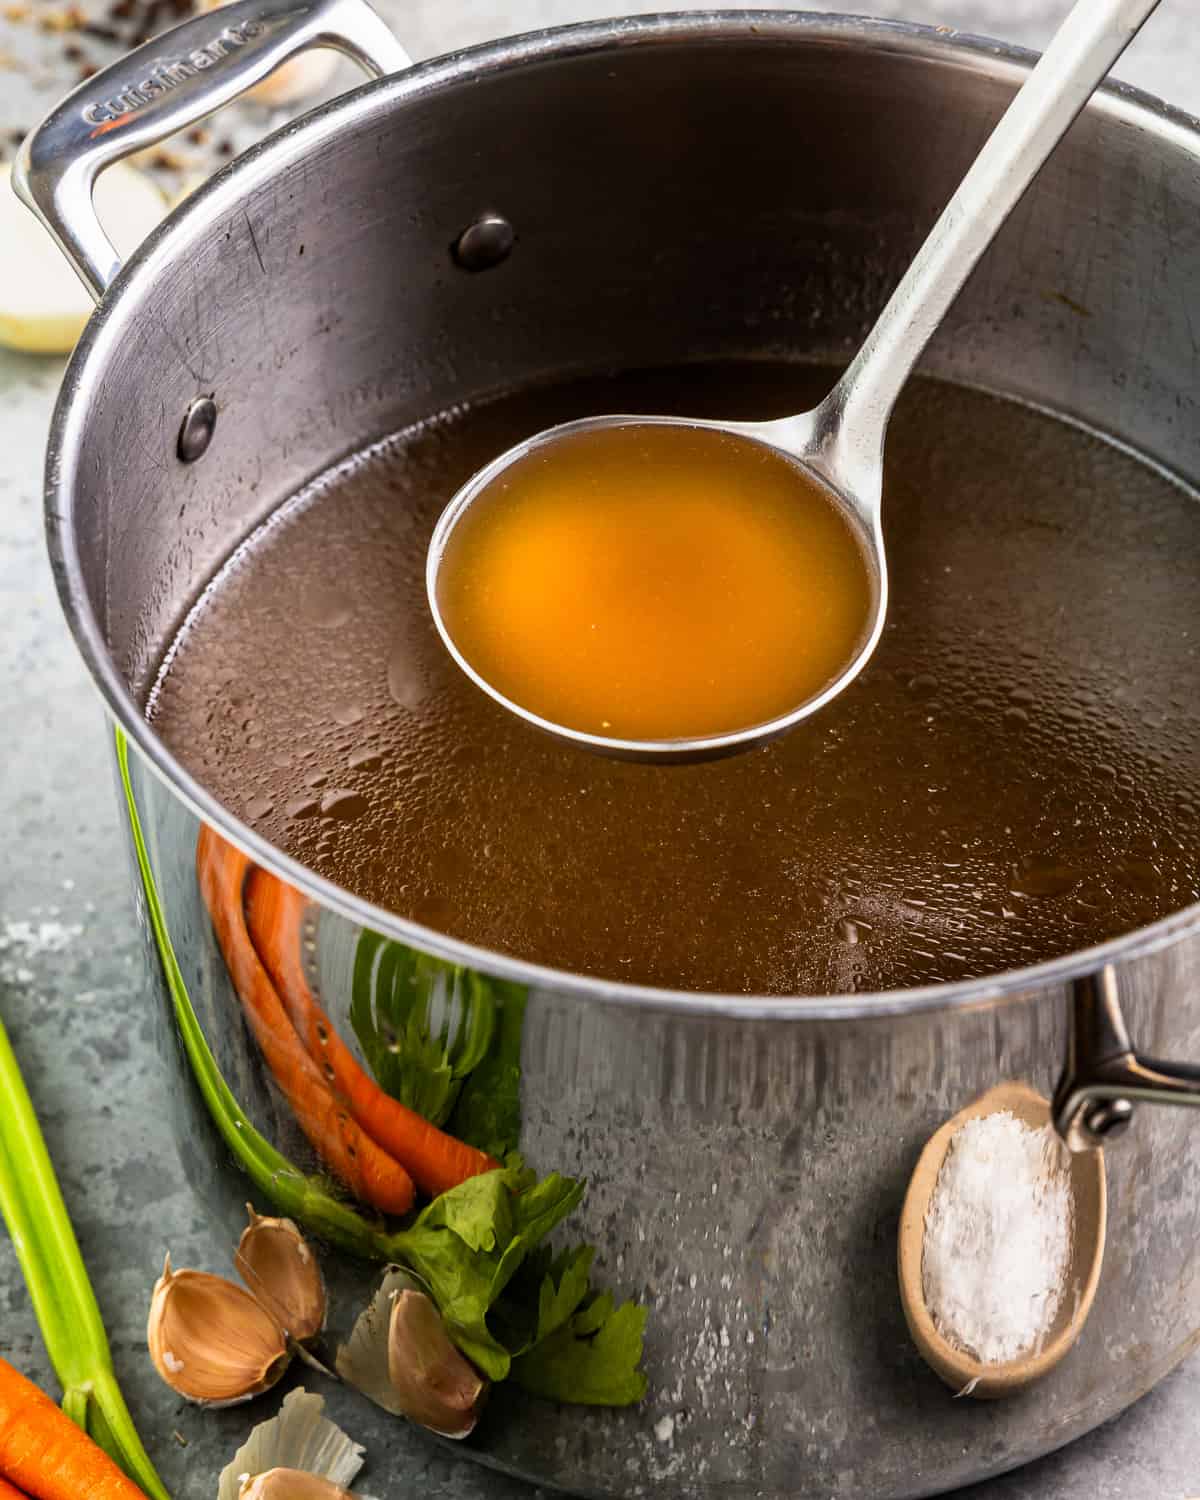 Broth in a pot with carrots and onions.